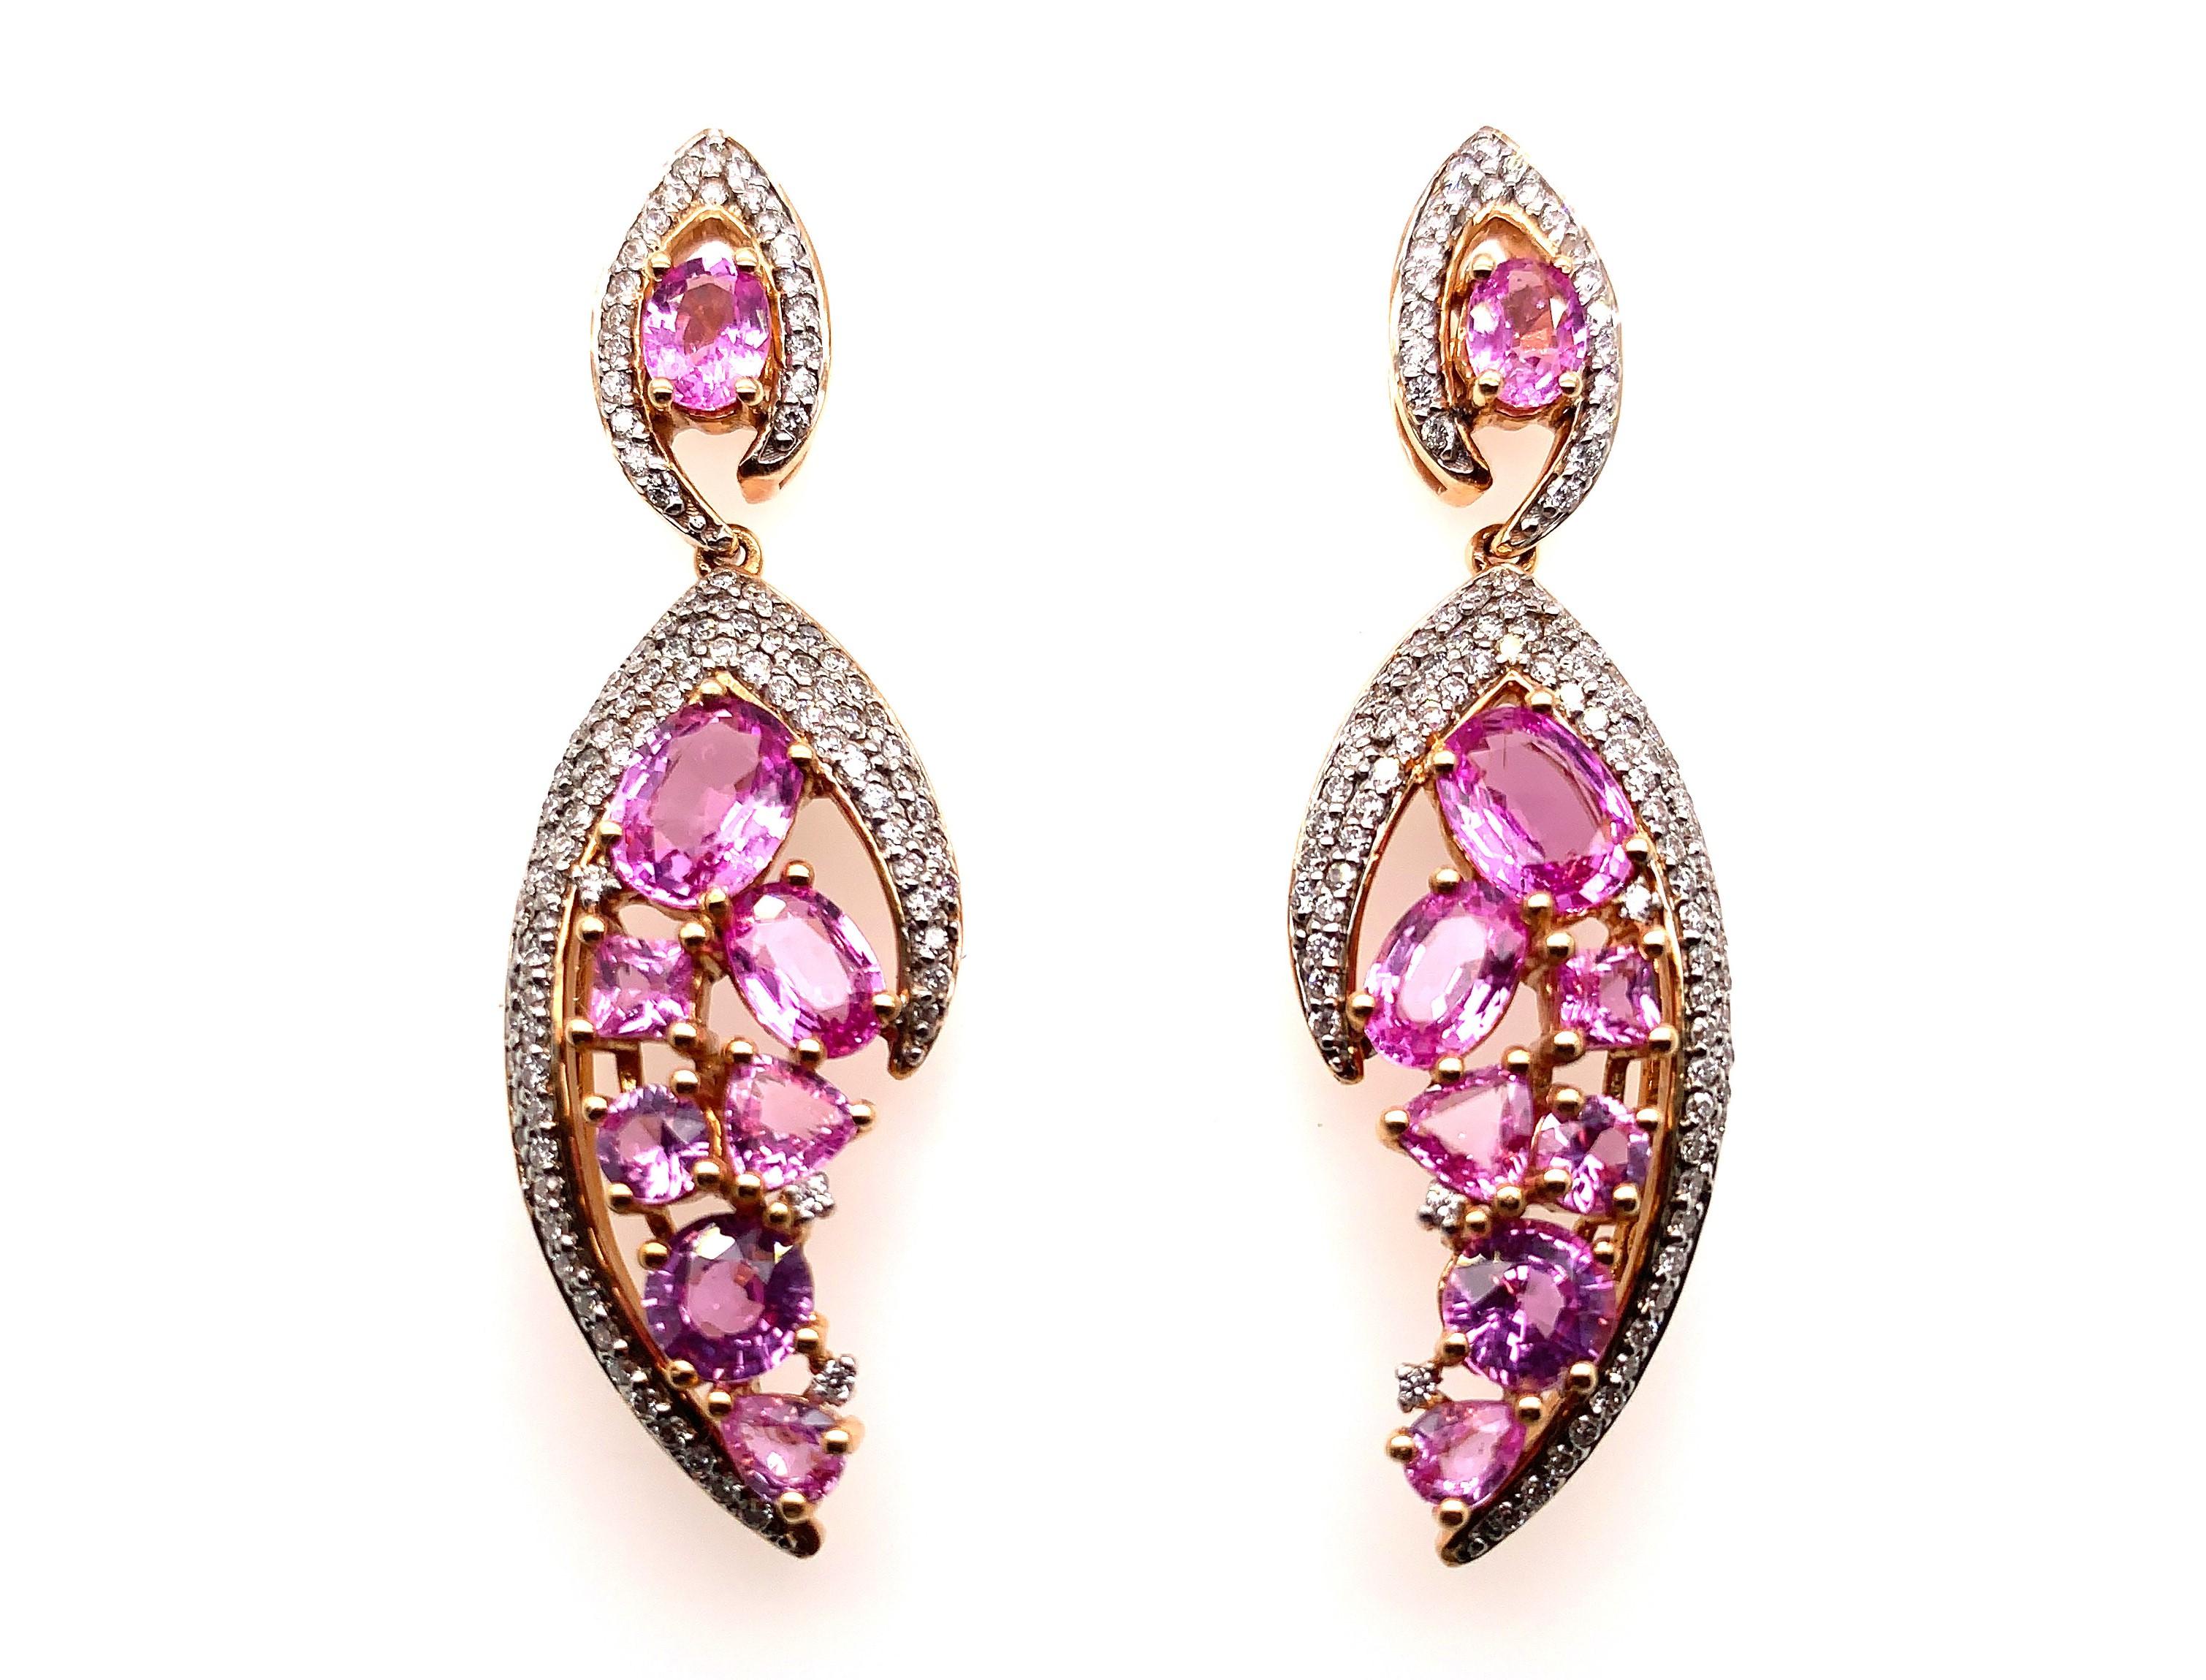 Sunita Nahata presents an exclusive collection of pink sapphire earrings. This particular earring showcases a cluster of different shapes and sizes of pink sapphires, and makes it a must have for those with an avid love for gemstones!

Designer pink